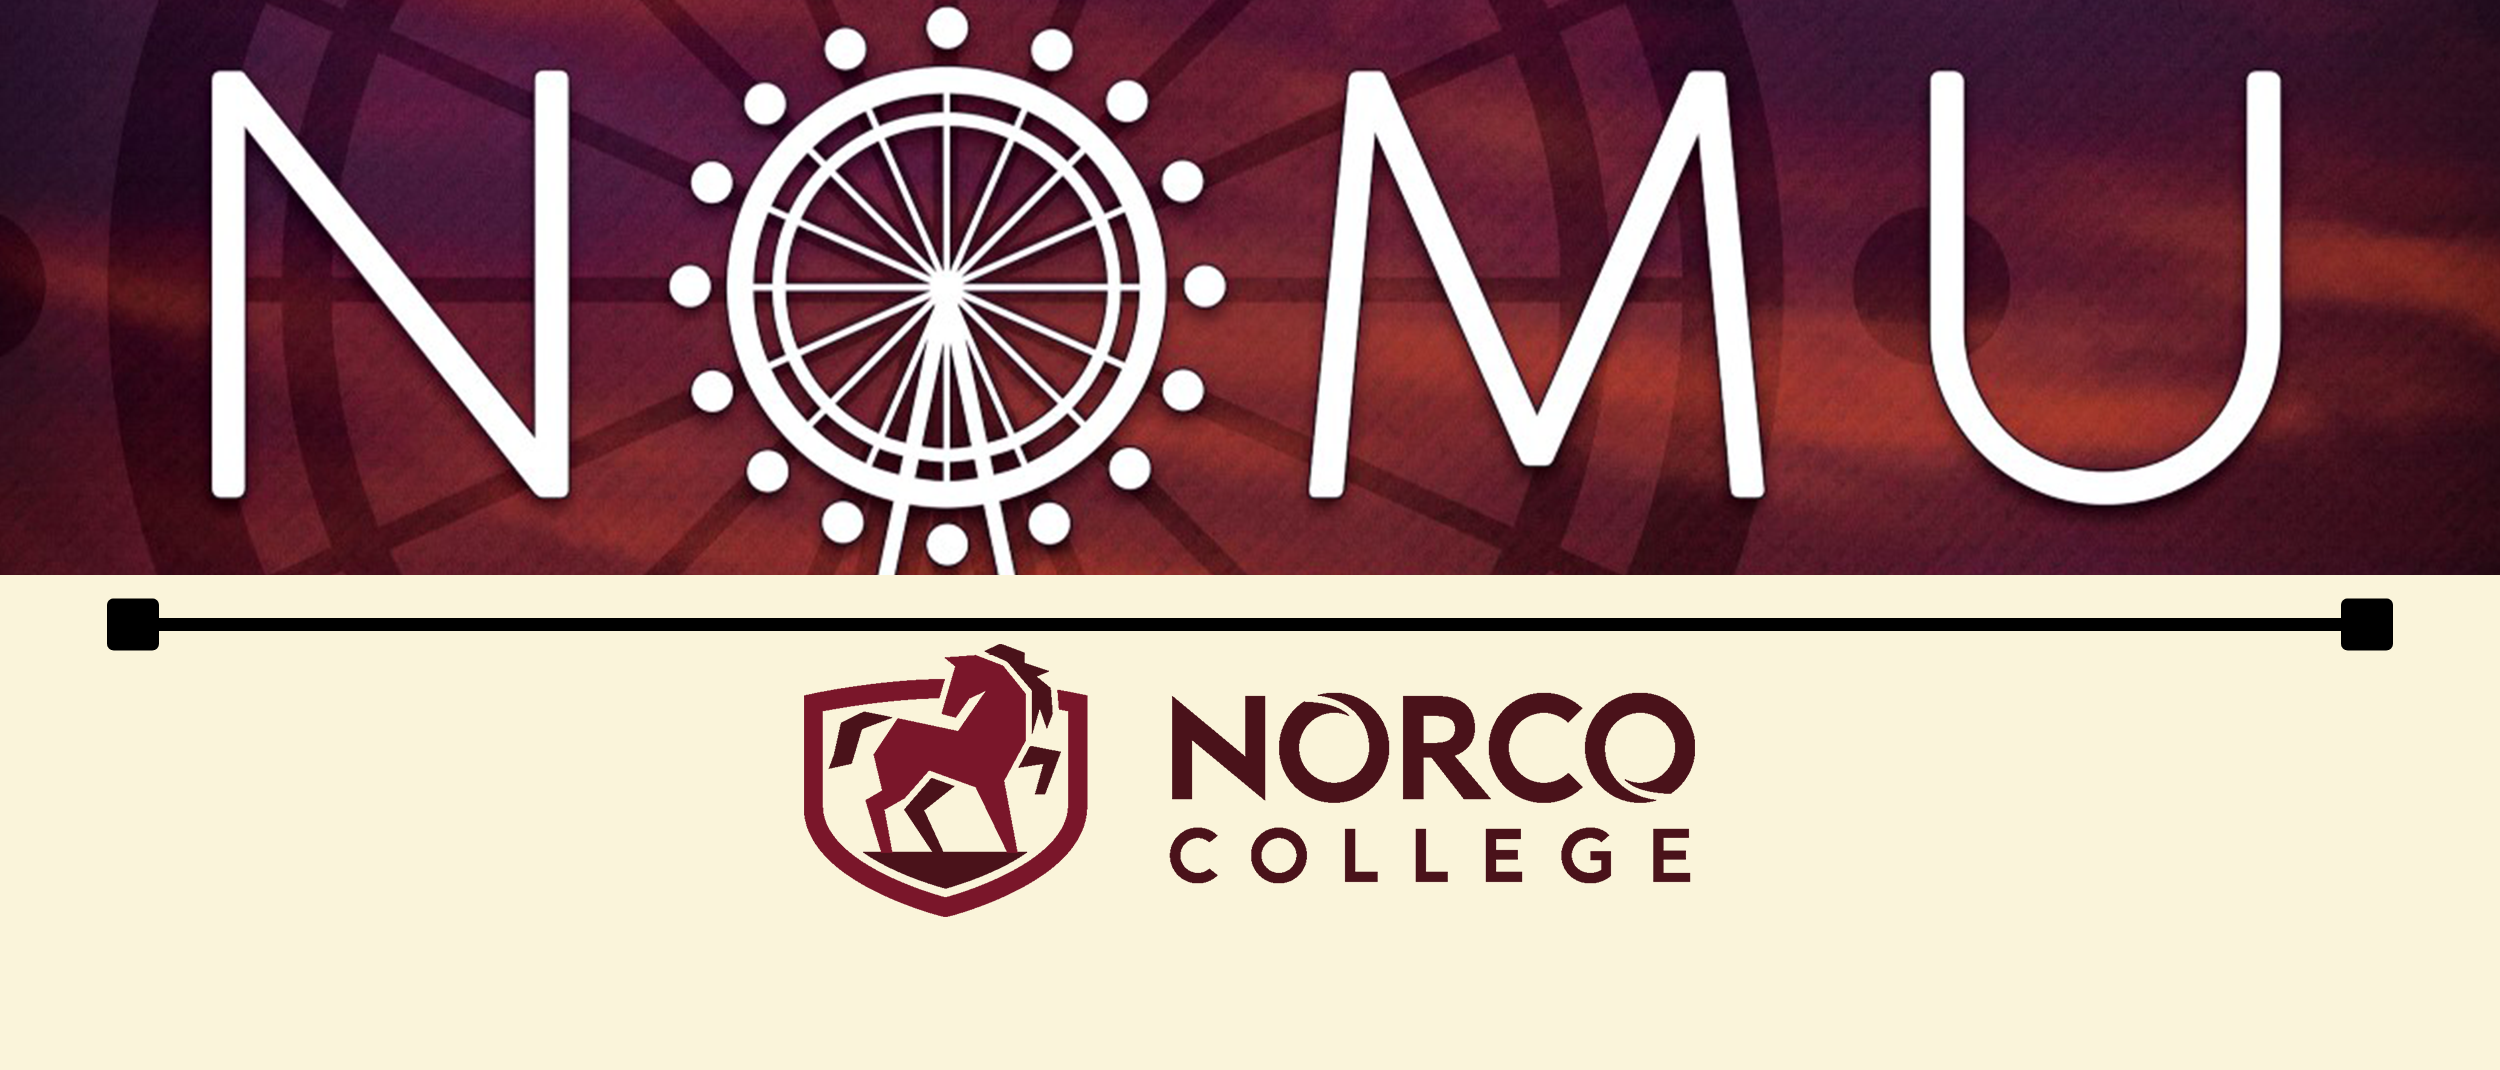 NOMU Norco College Music and Arts Festival hero image banner